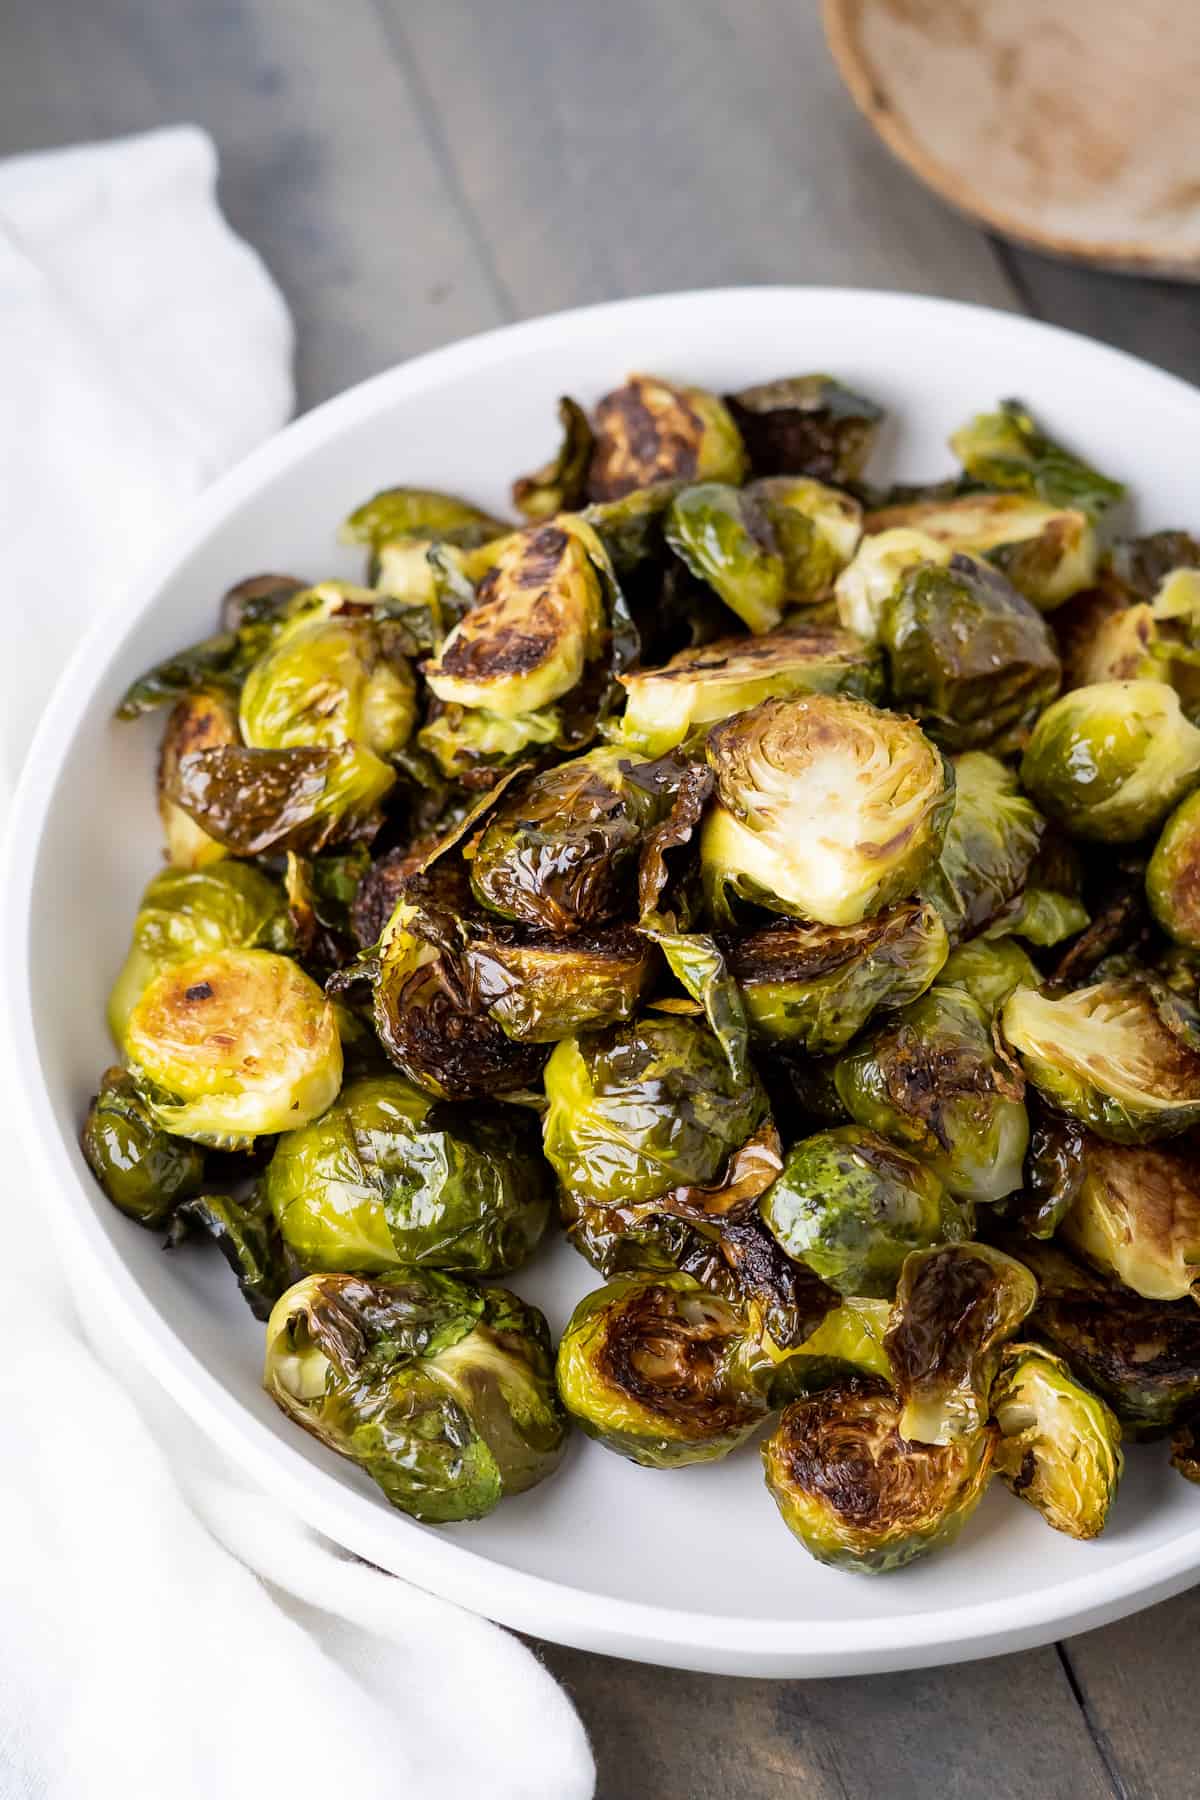 A large pile of crispy roasted brussels sprouts in a bowl with browning edges and sea salt.